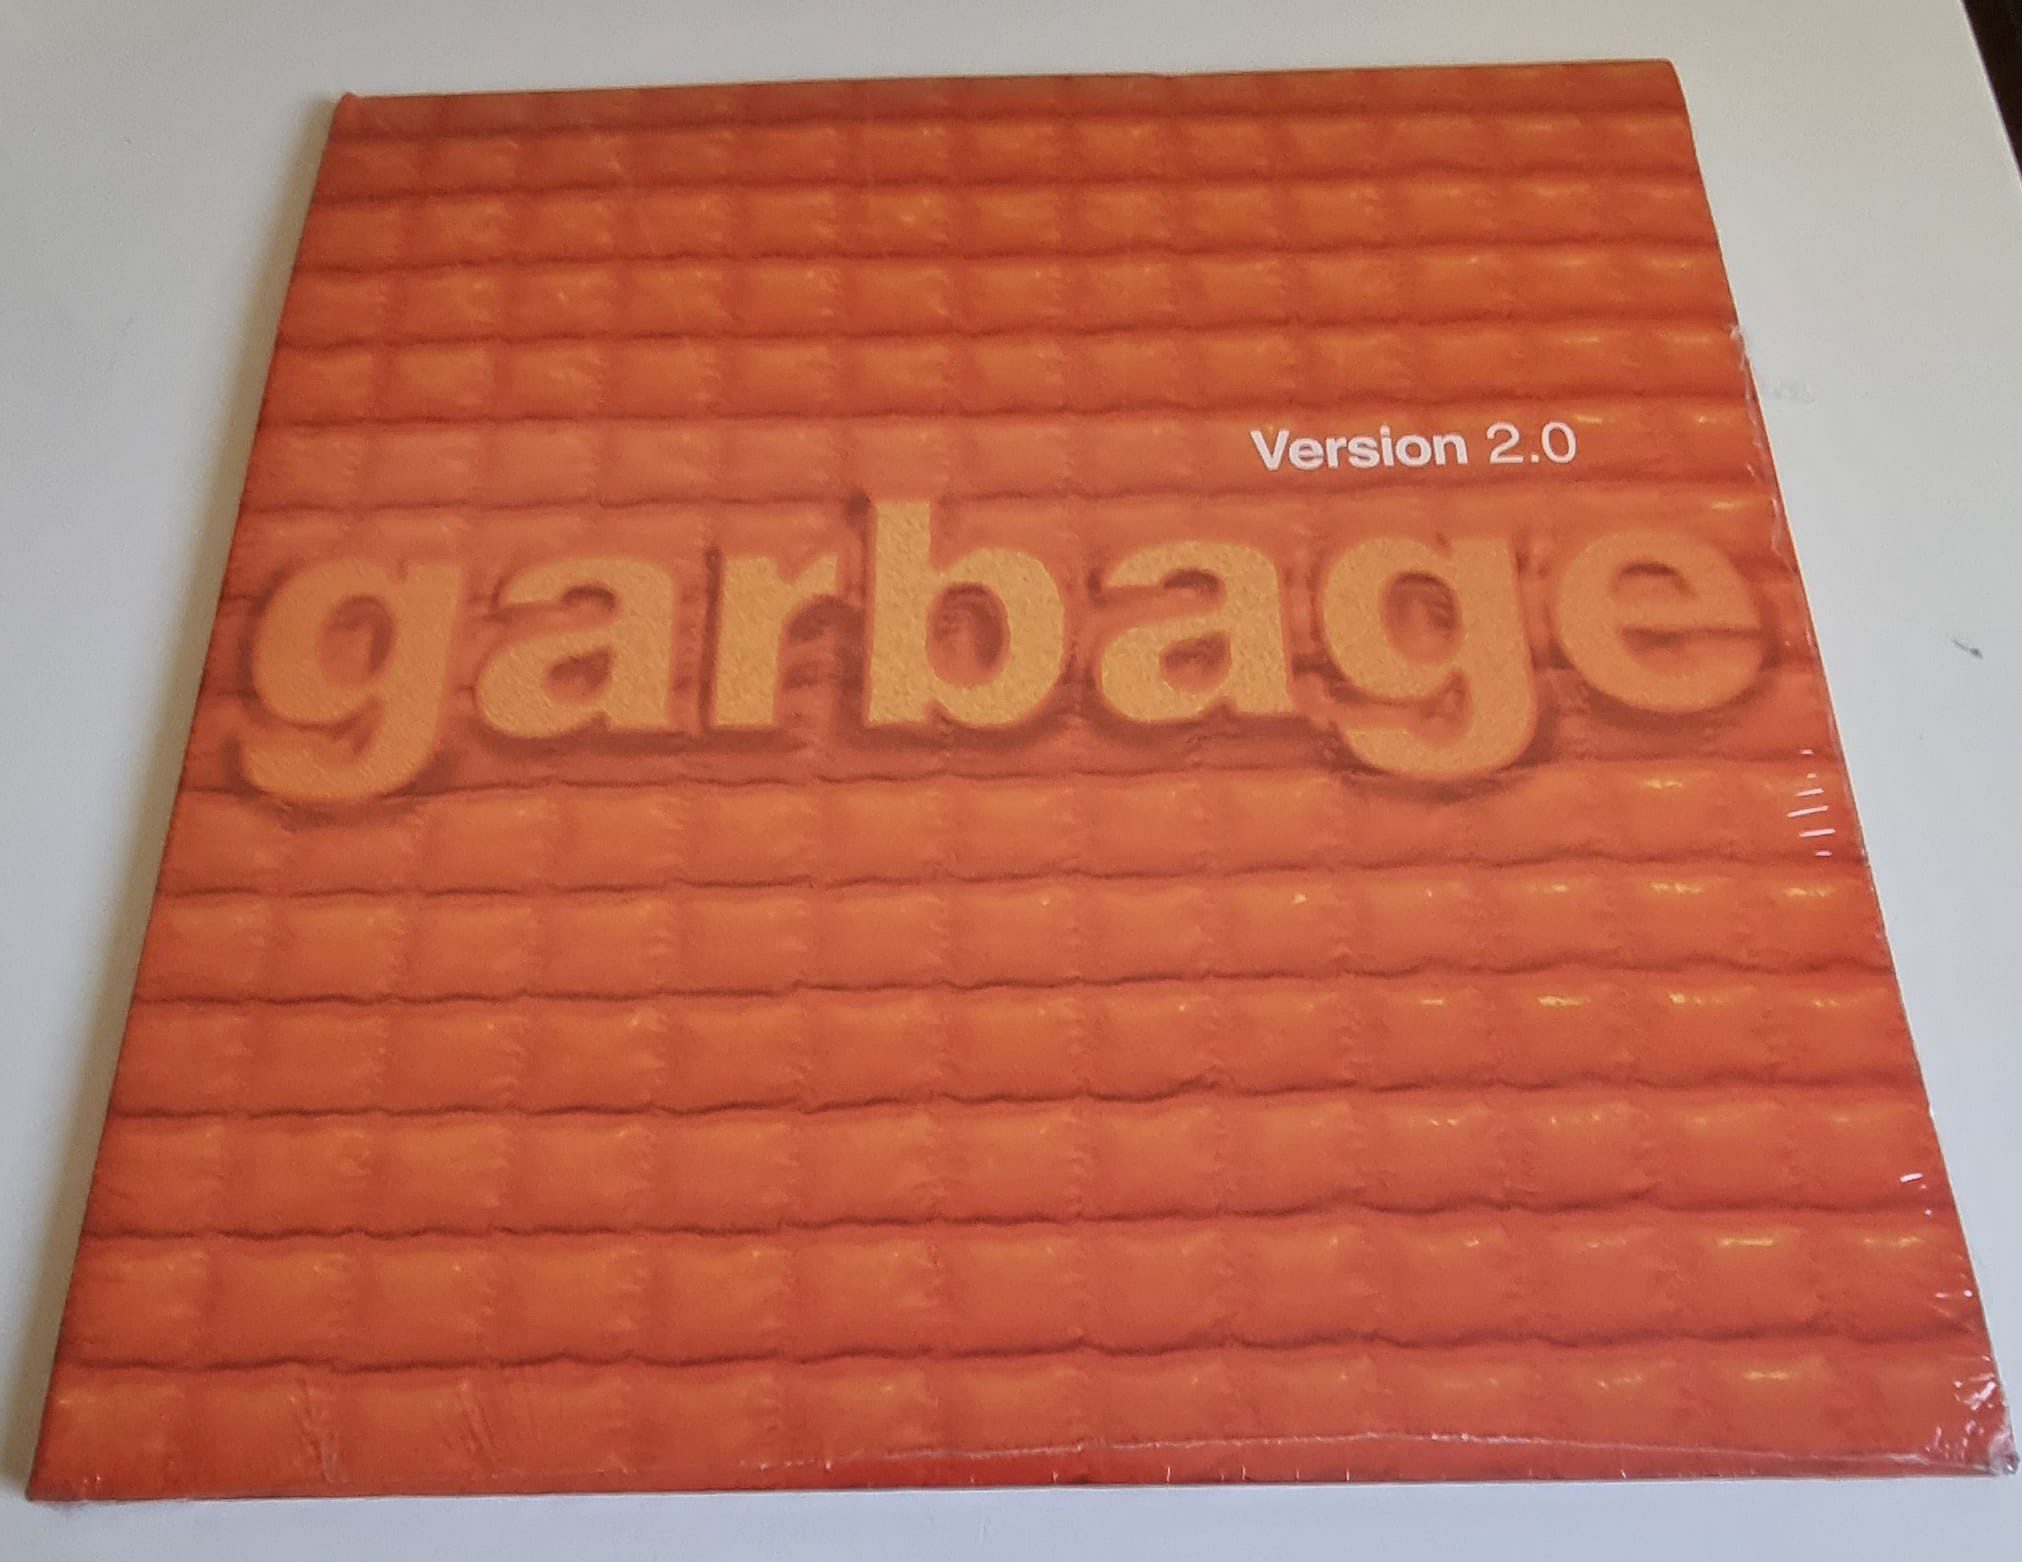 Buy this rare Garbage record by clicking here